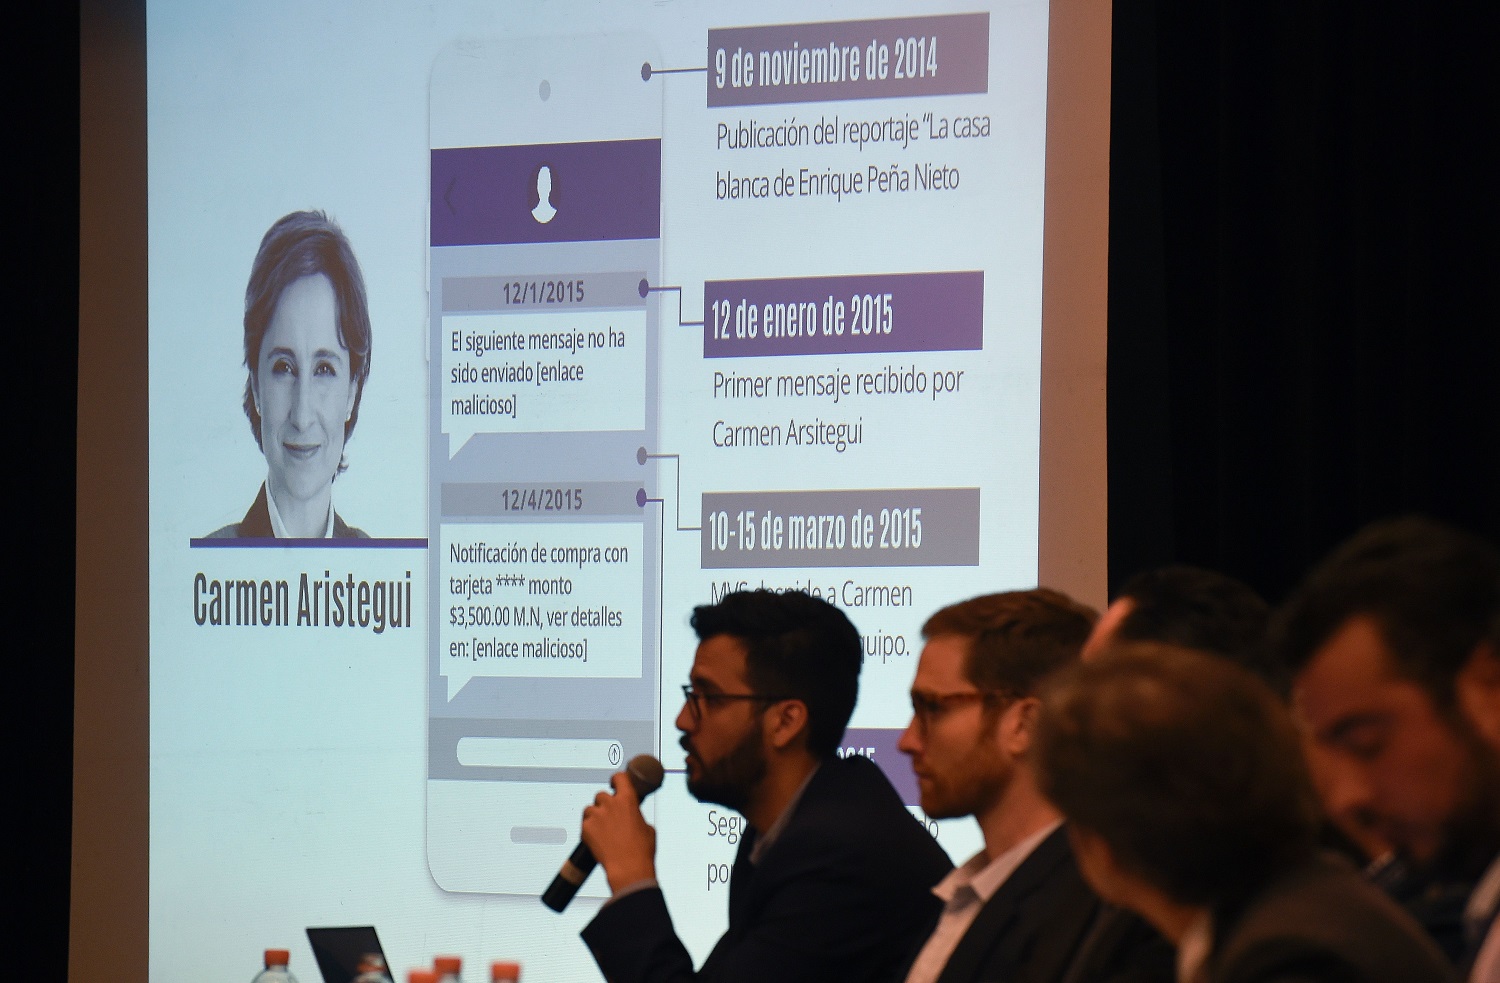 Information on Mexican journalist Carmen Aristegui is displayed on a screen during a journalists' a press conference in Mexico City on June 19, 2017, on an article published by the New York Times: "Using Texts as Lures, Government Spyware Targets Mexican Journalists and Their Families".  / AFP / ALFREDO ESTRELLA